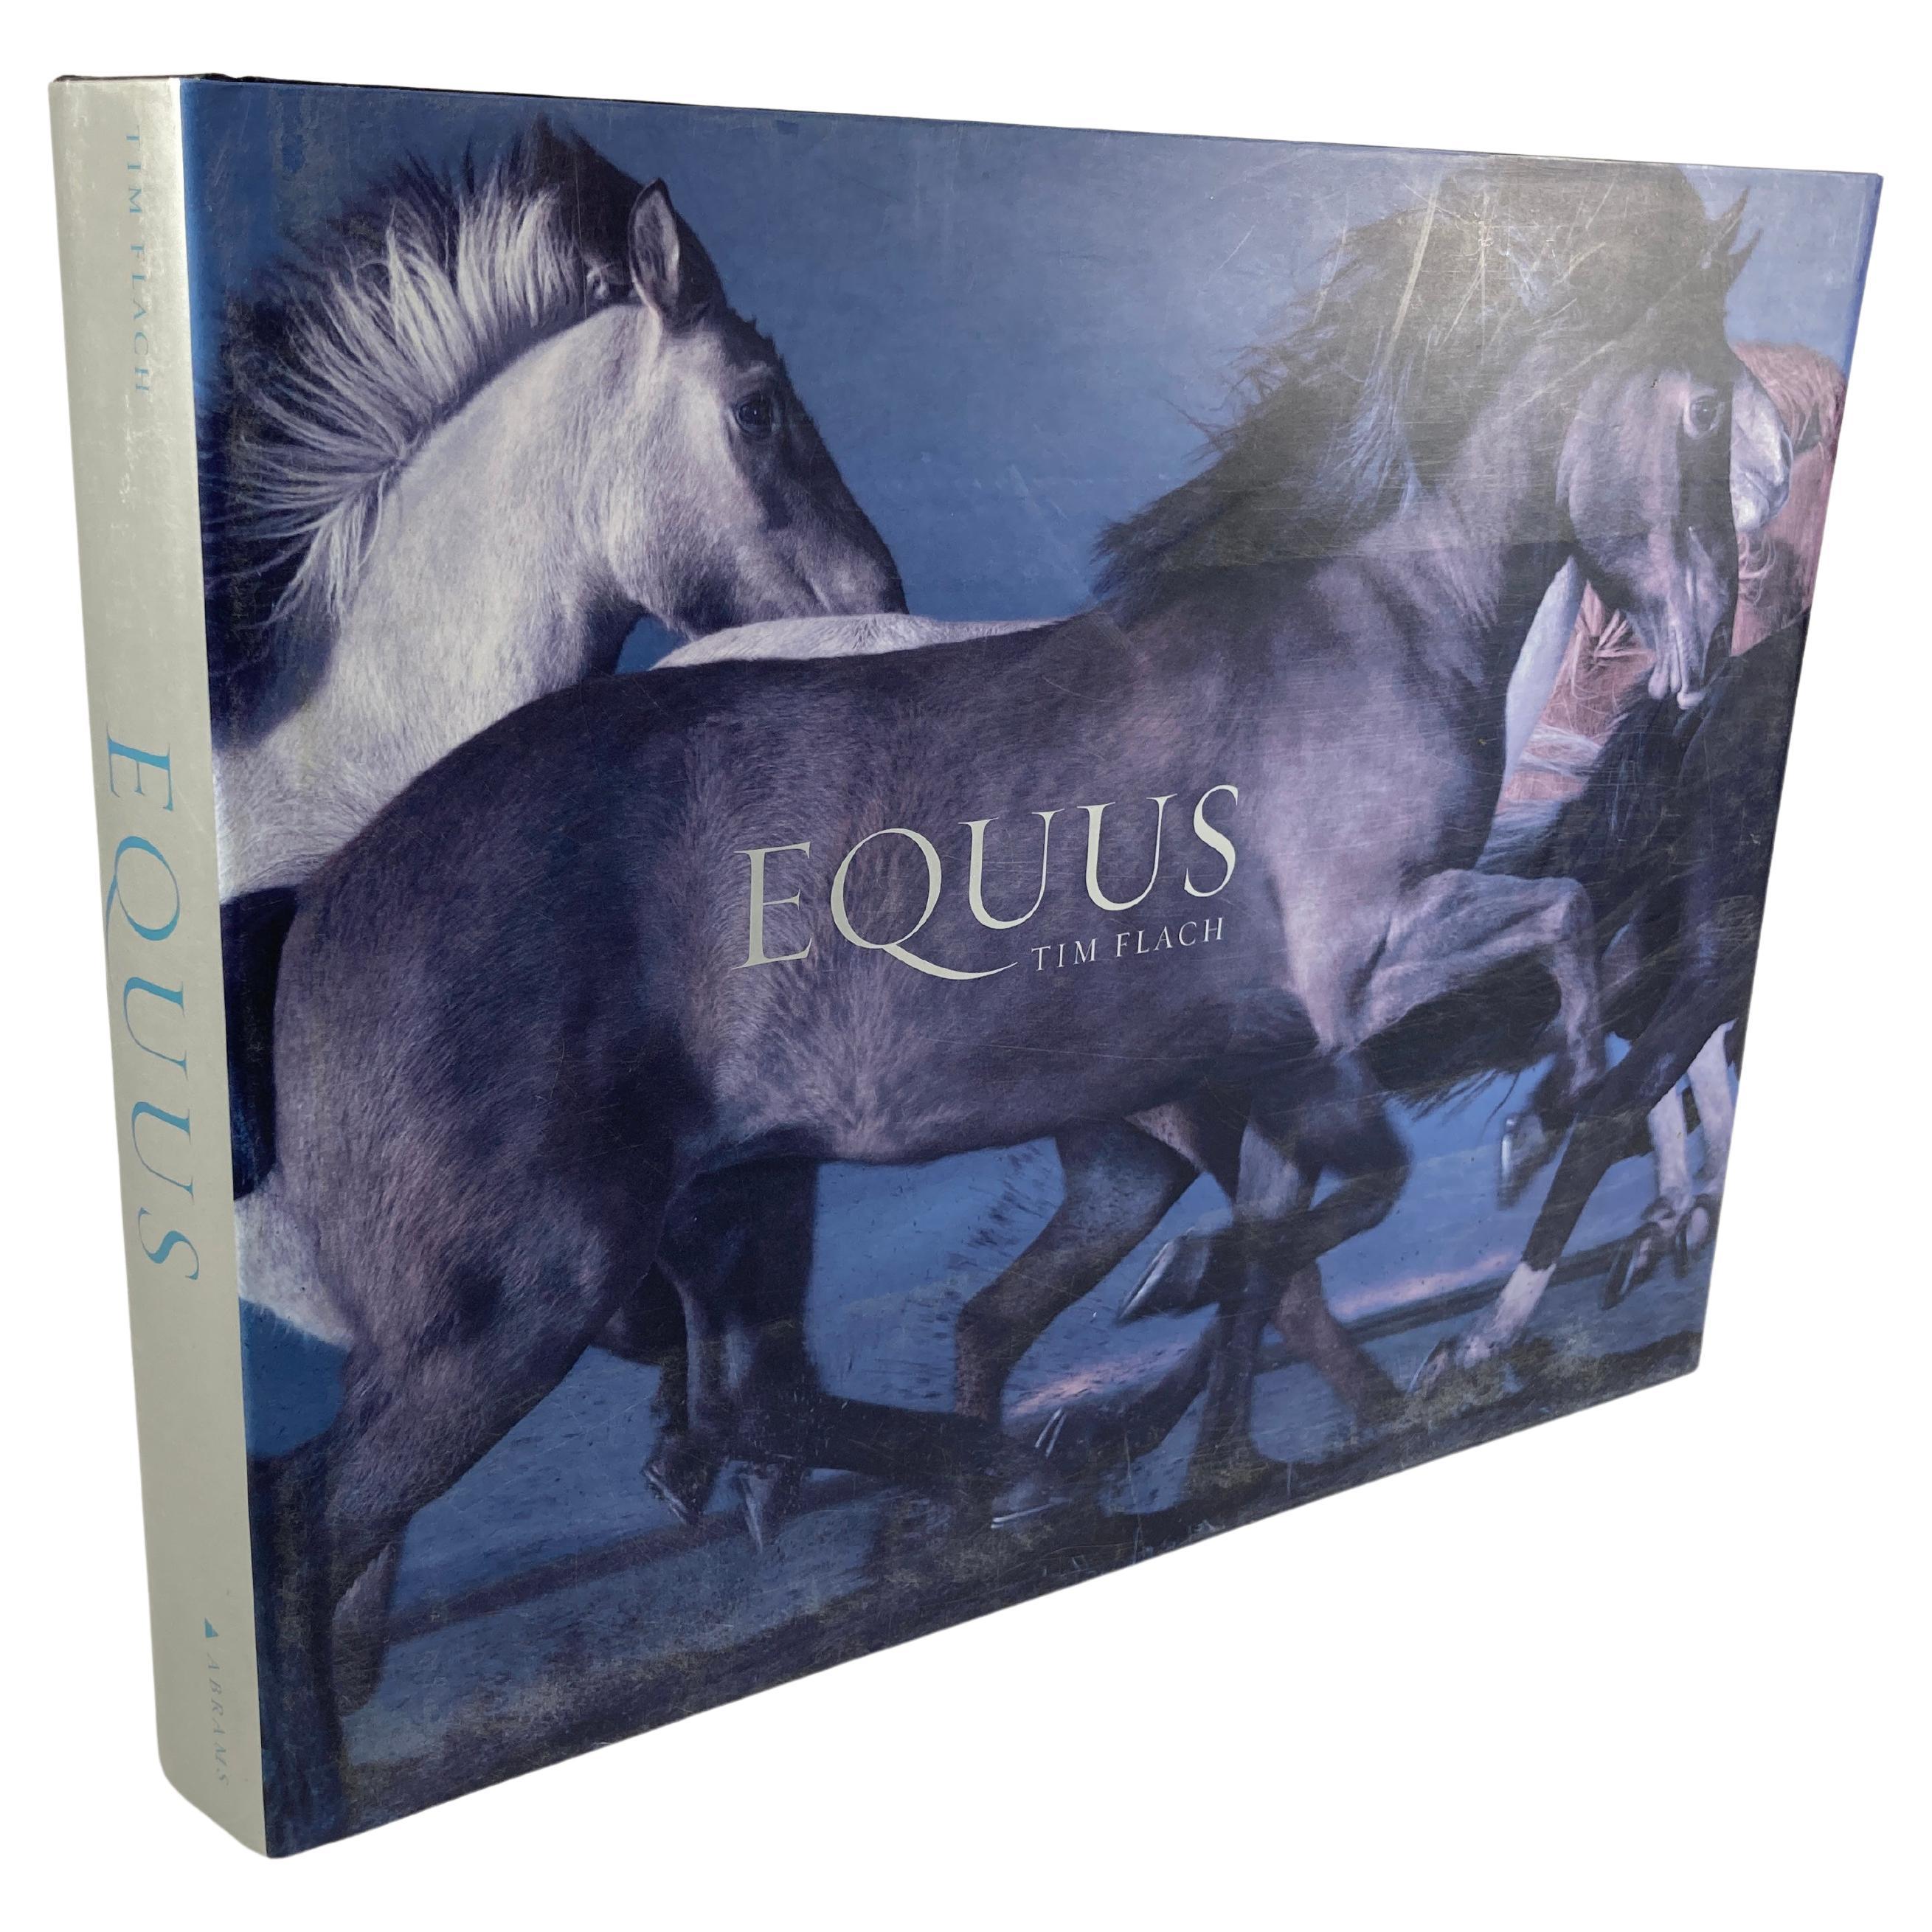 Equus by Tim Flach Large Hardcover Large Table Book 1st Edition